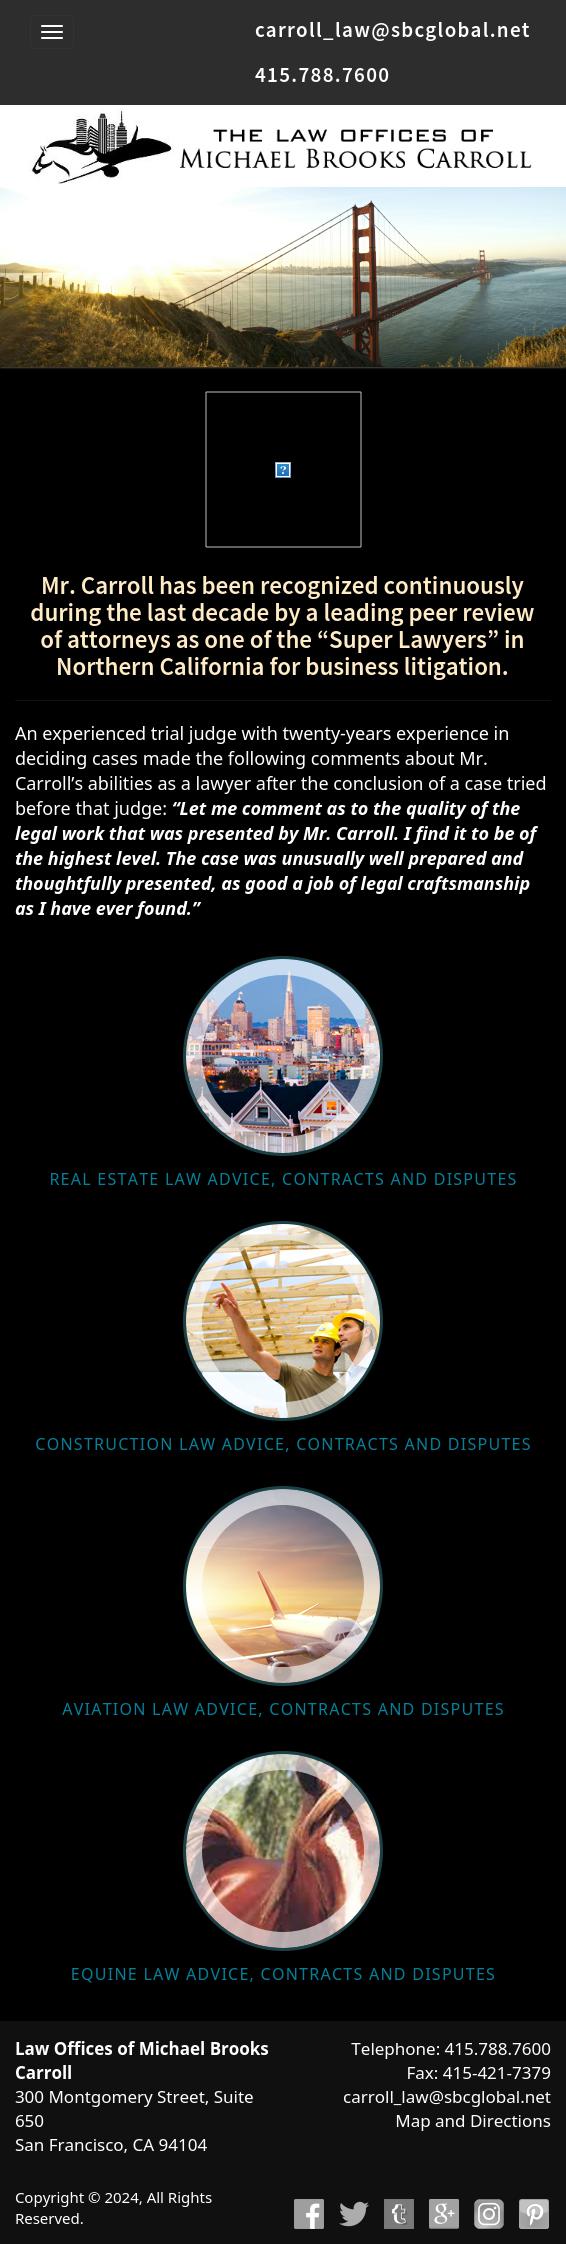 Carroll Law Offices - San Francisco CA Lawyers